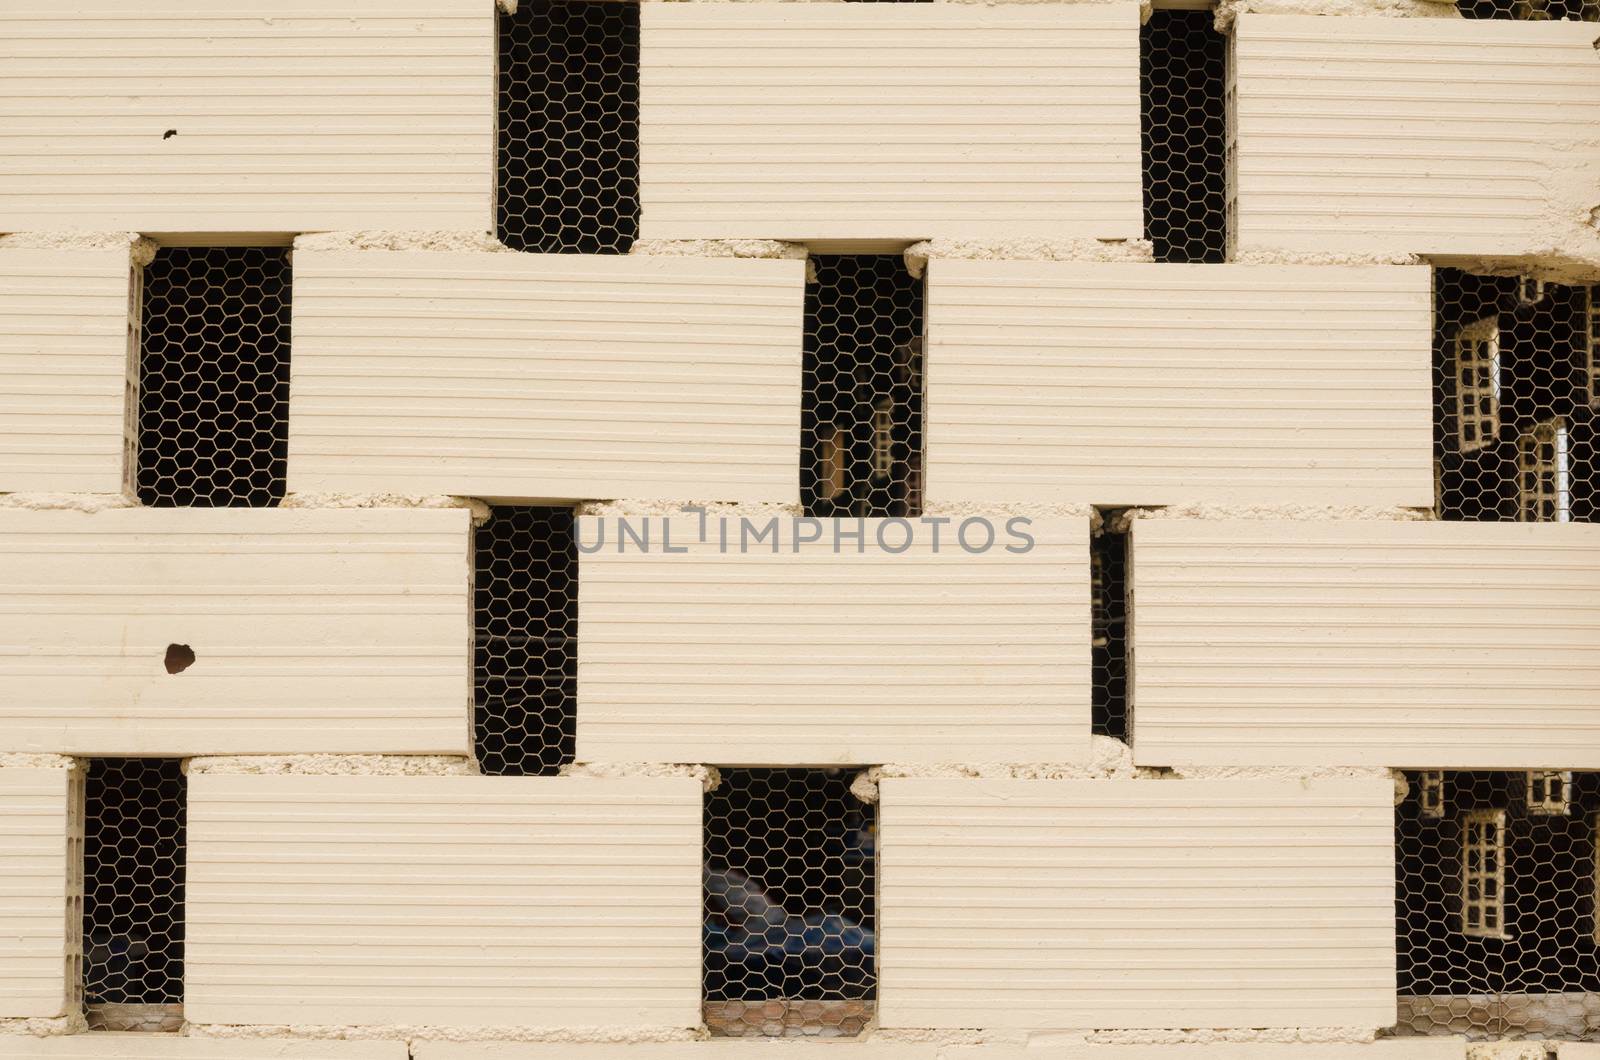 Full frame take of a brick wall with ventilation gaps